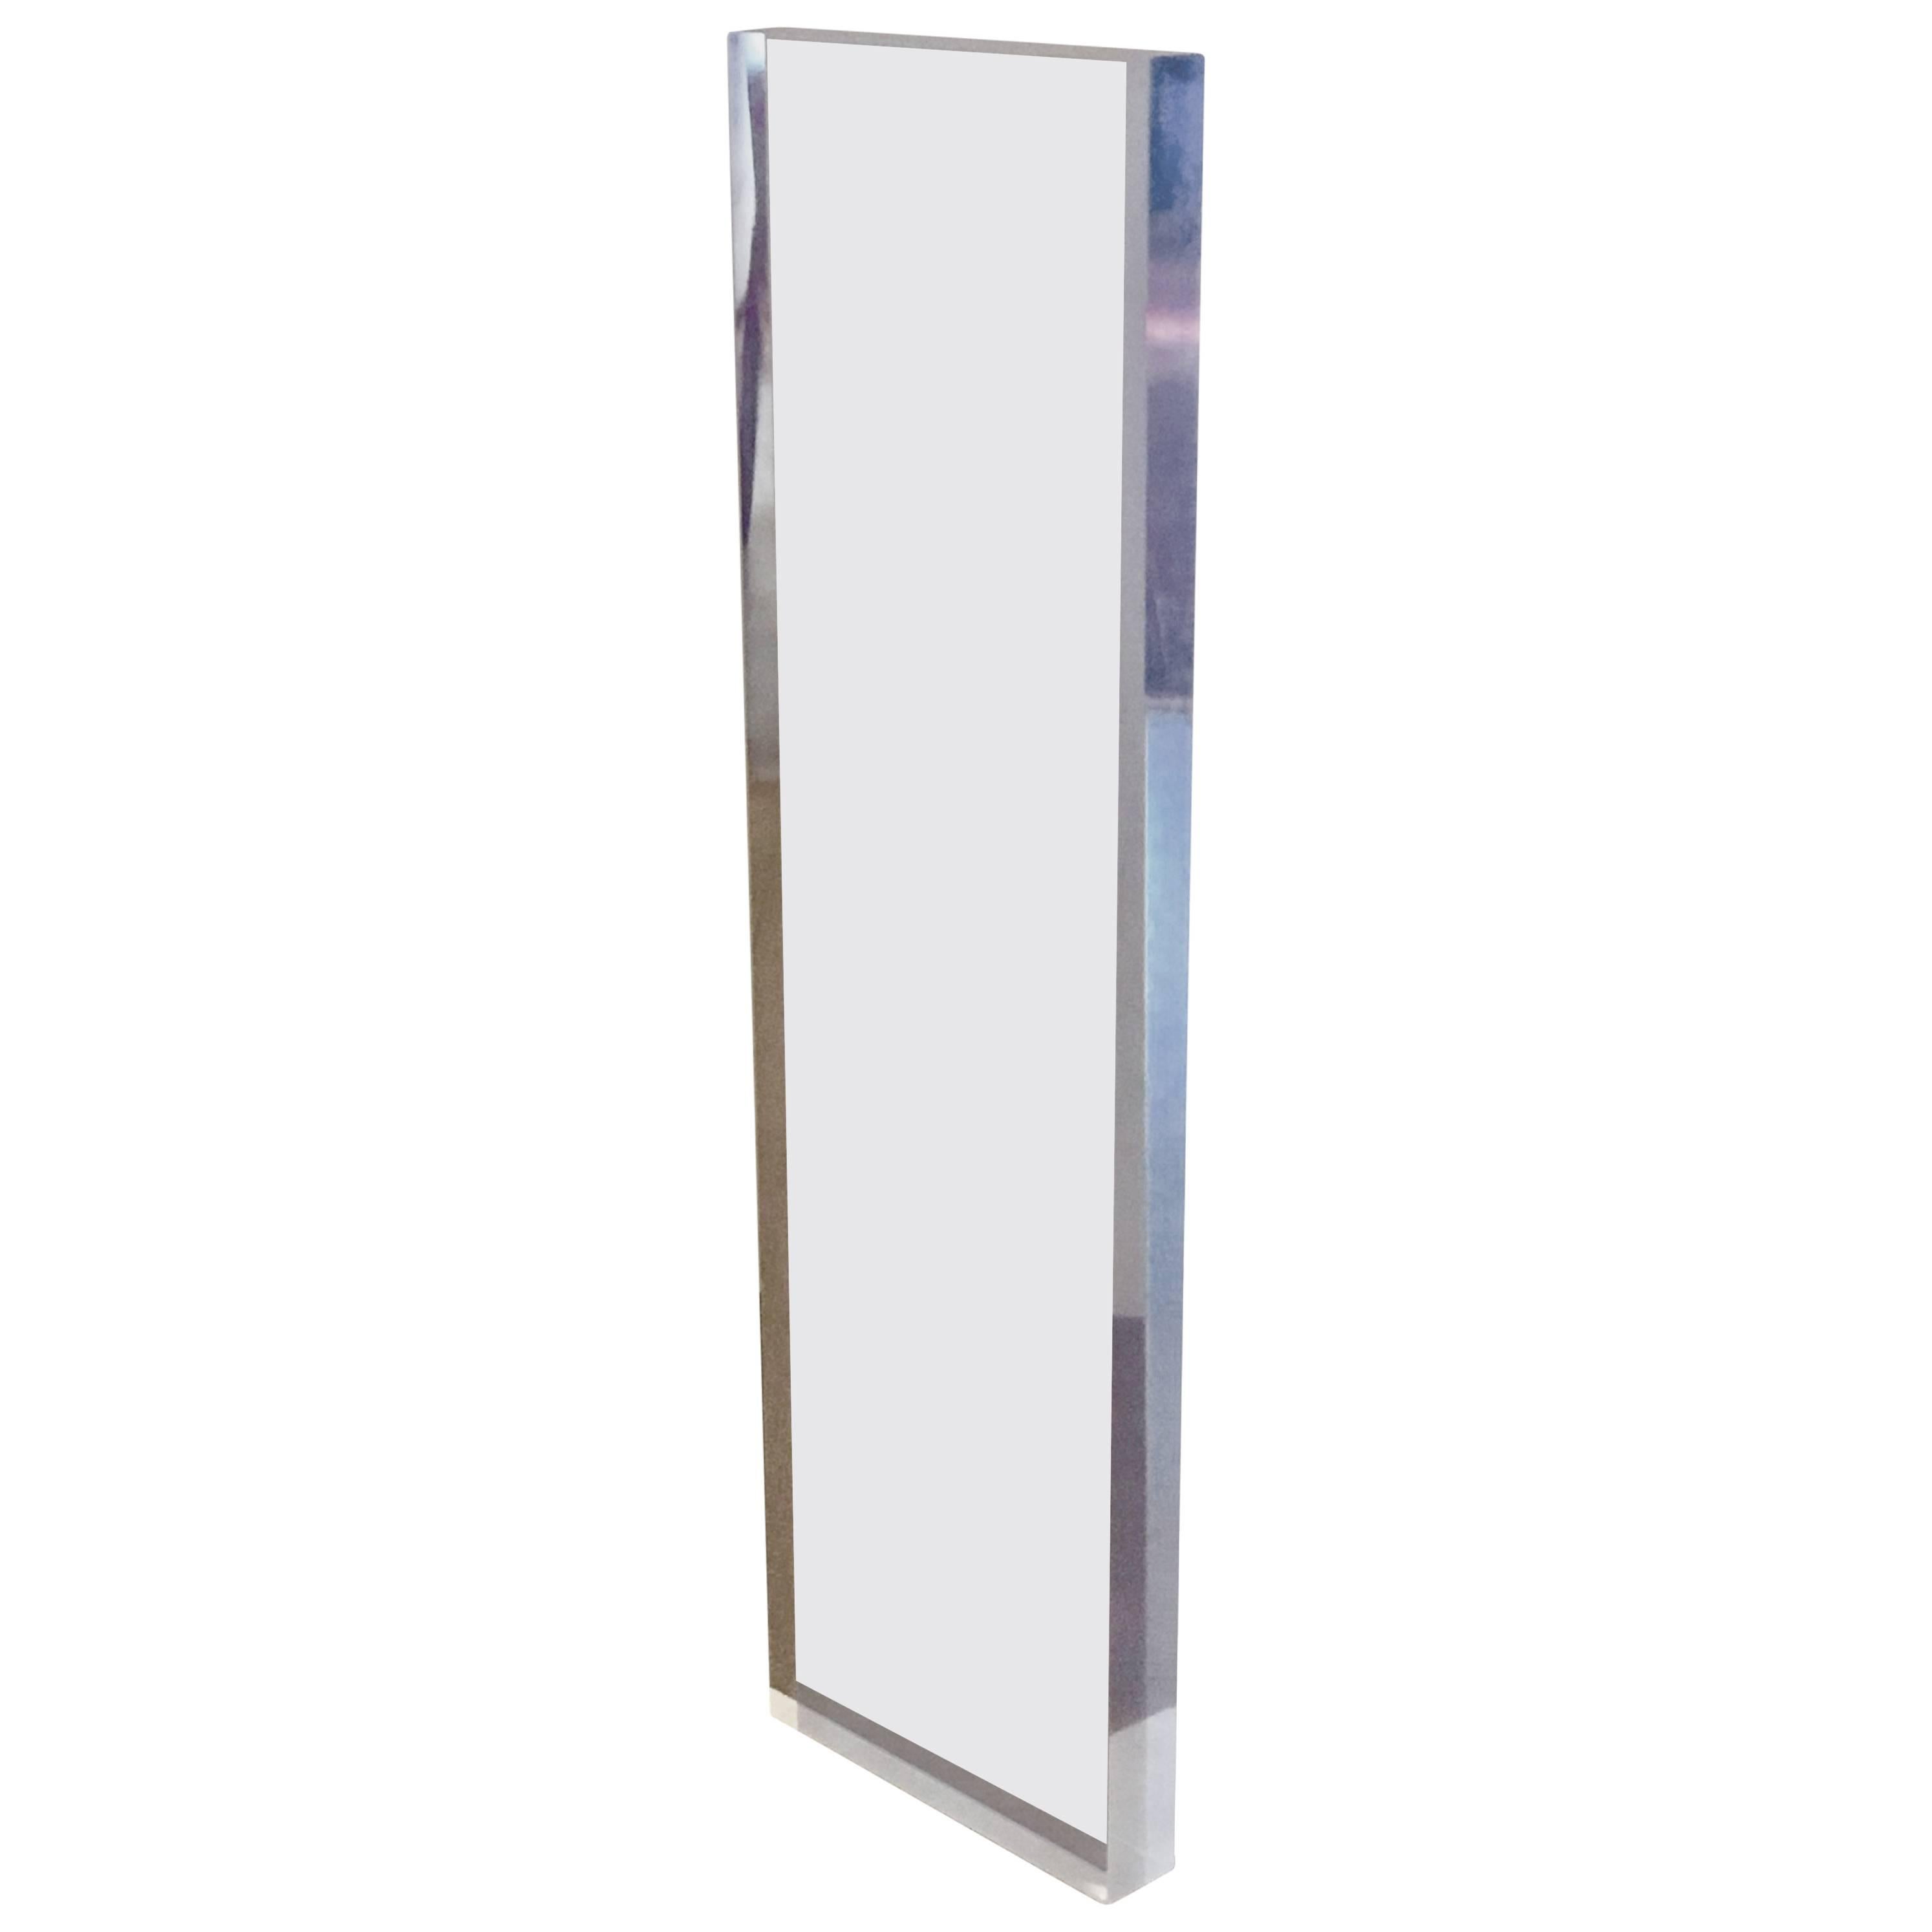 Massive Tall Sculpture Solid Block of Lucite in Purple Tint